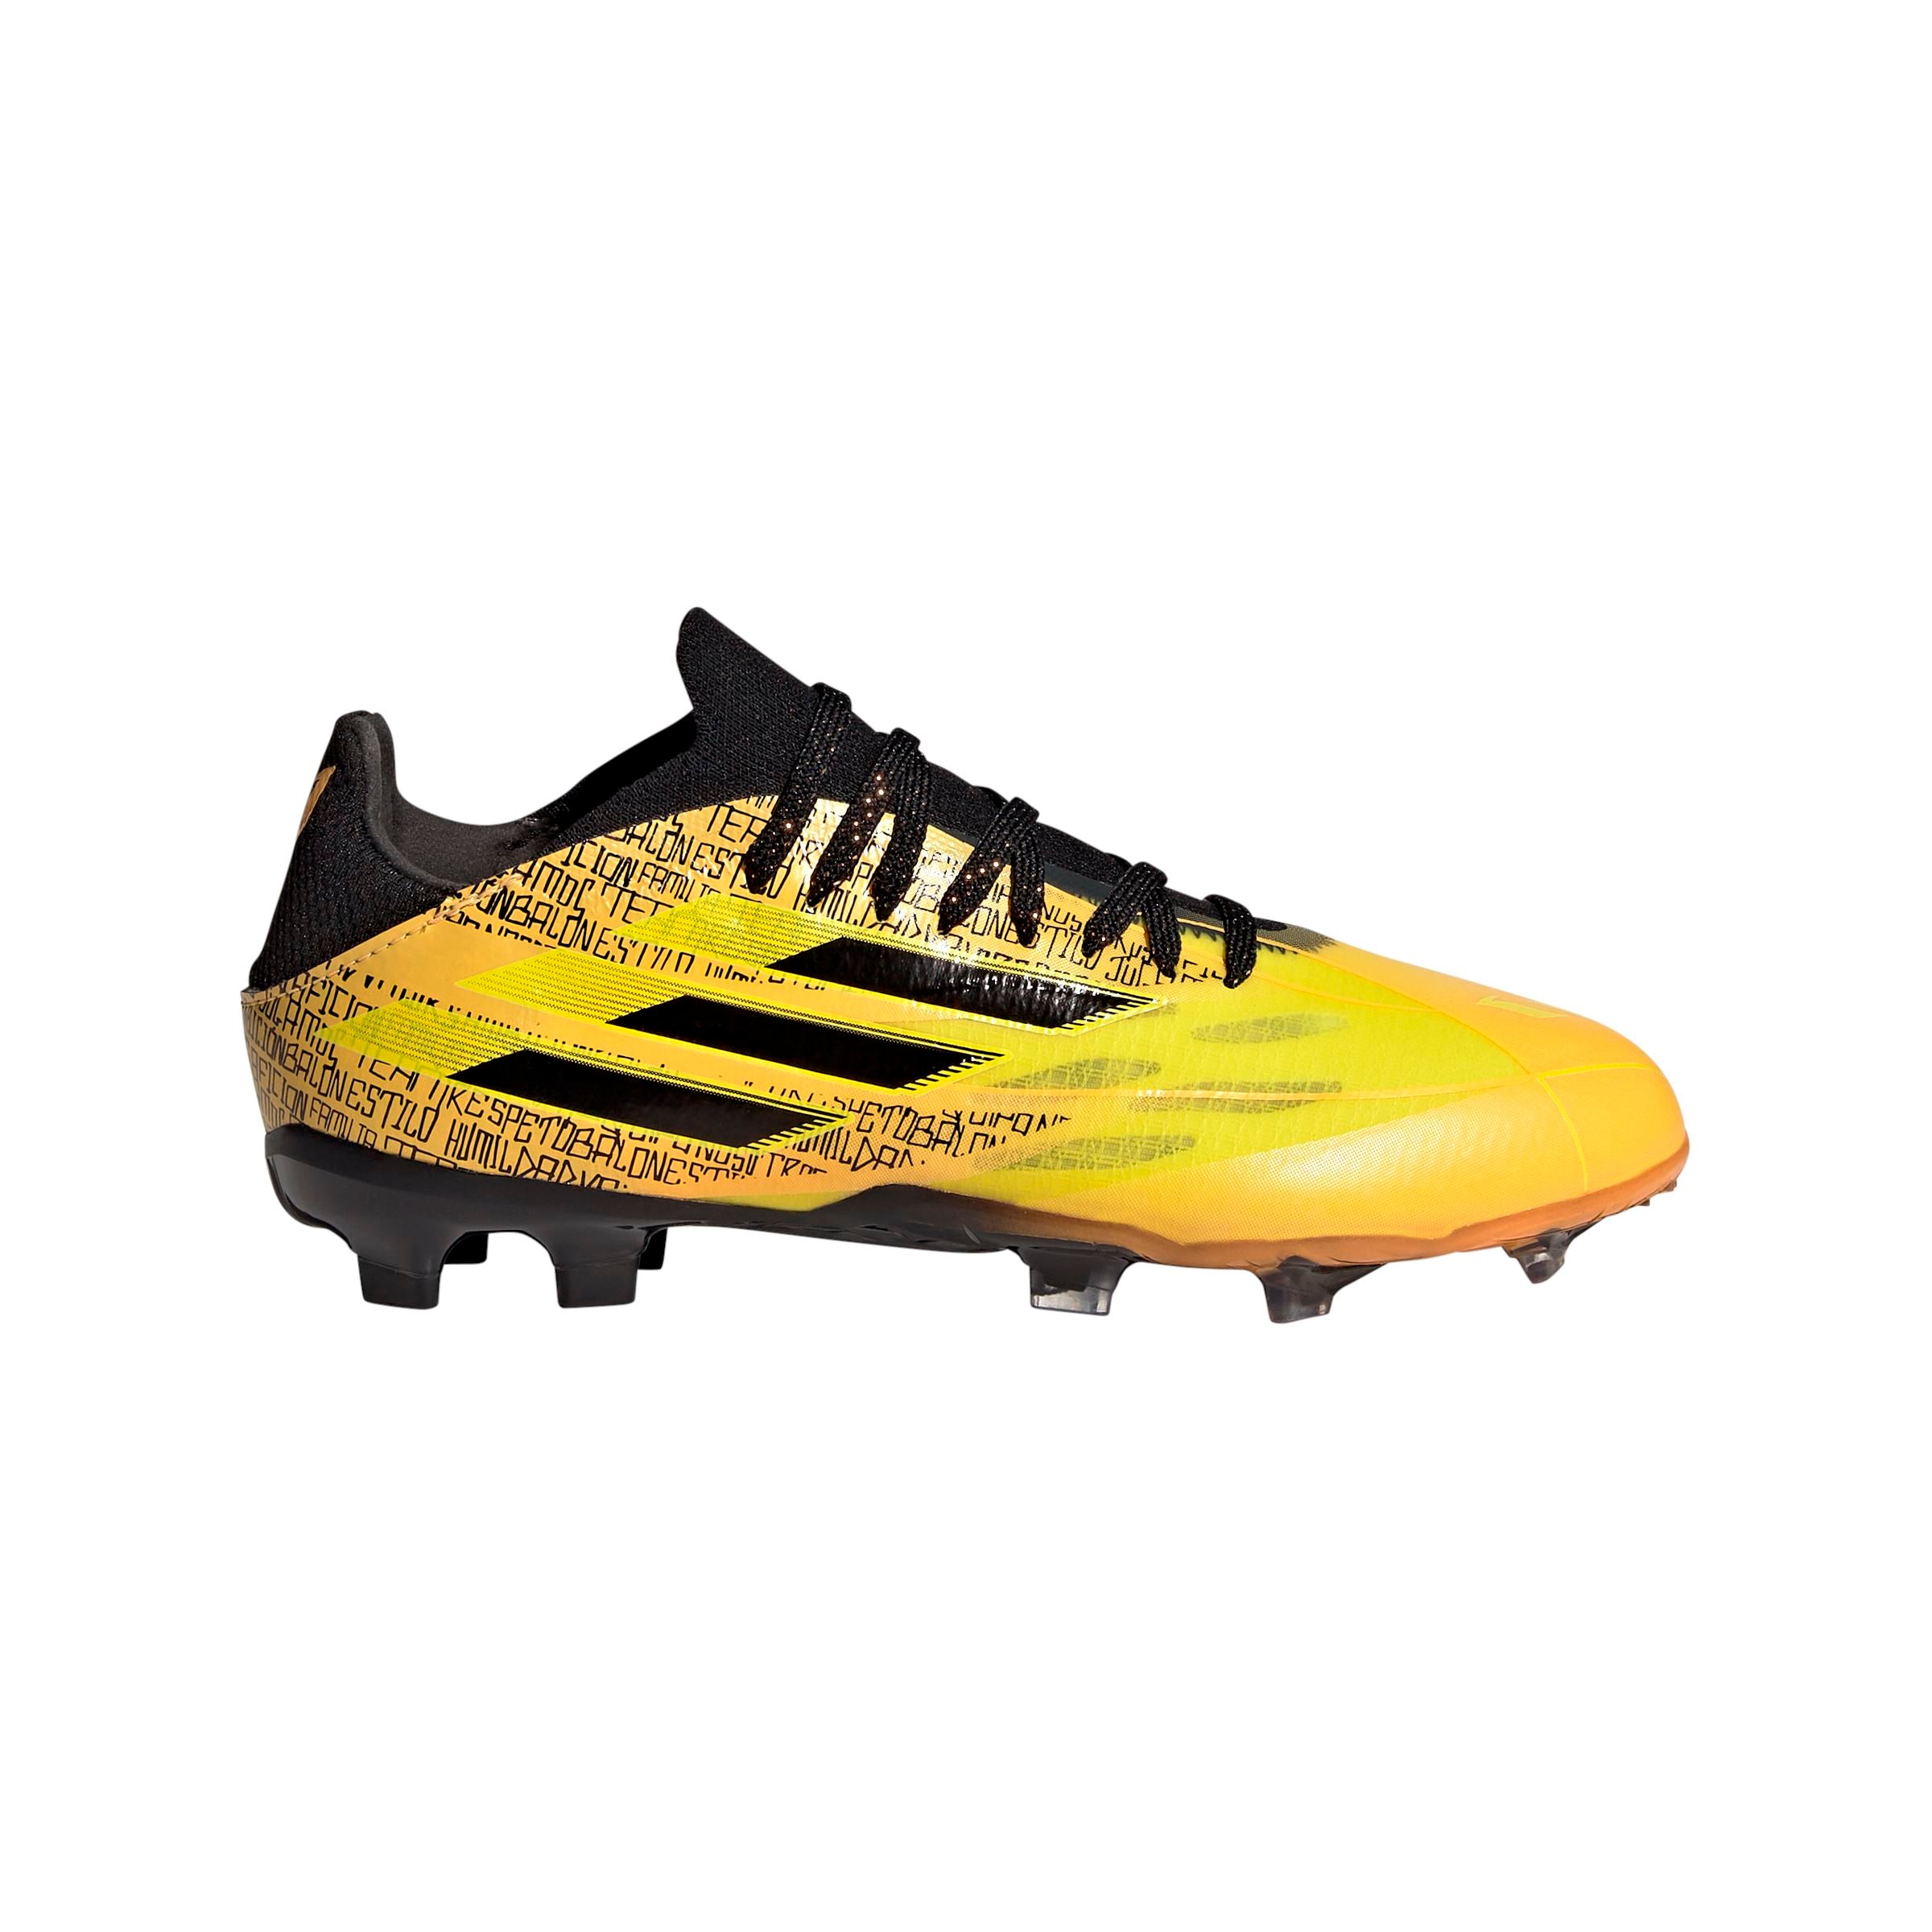 uddybe Optø, optø, frost tø sigte adidas Youth X Speedflow Messi.1 Firm Ground Cleats | GW7418